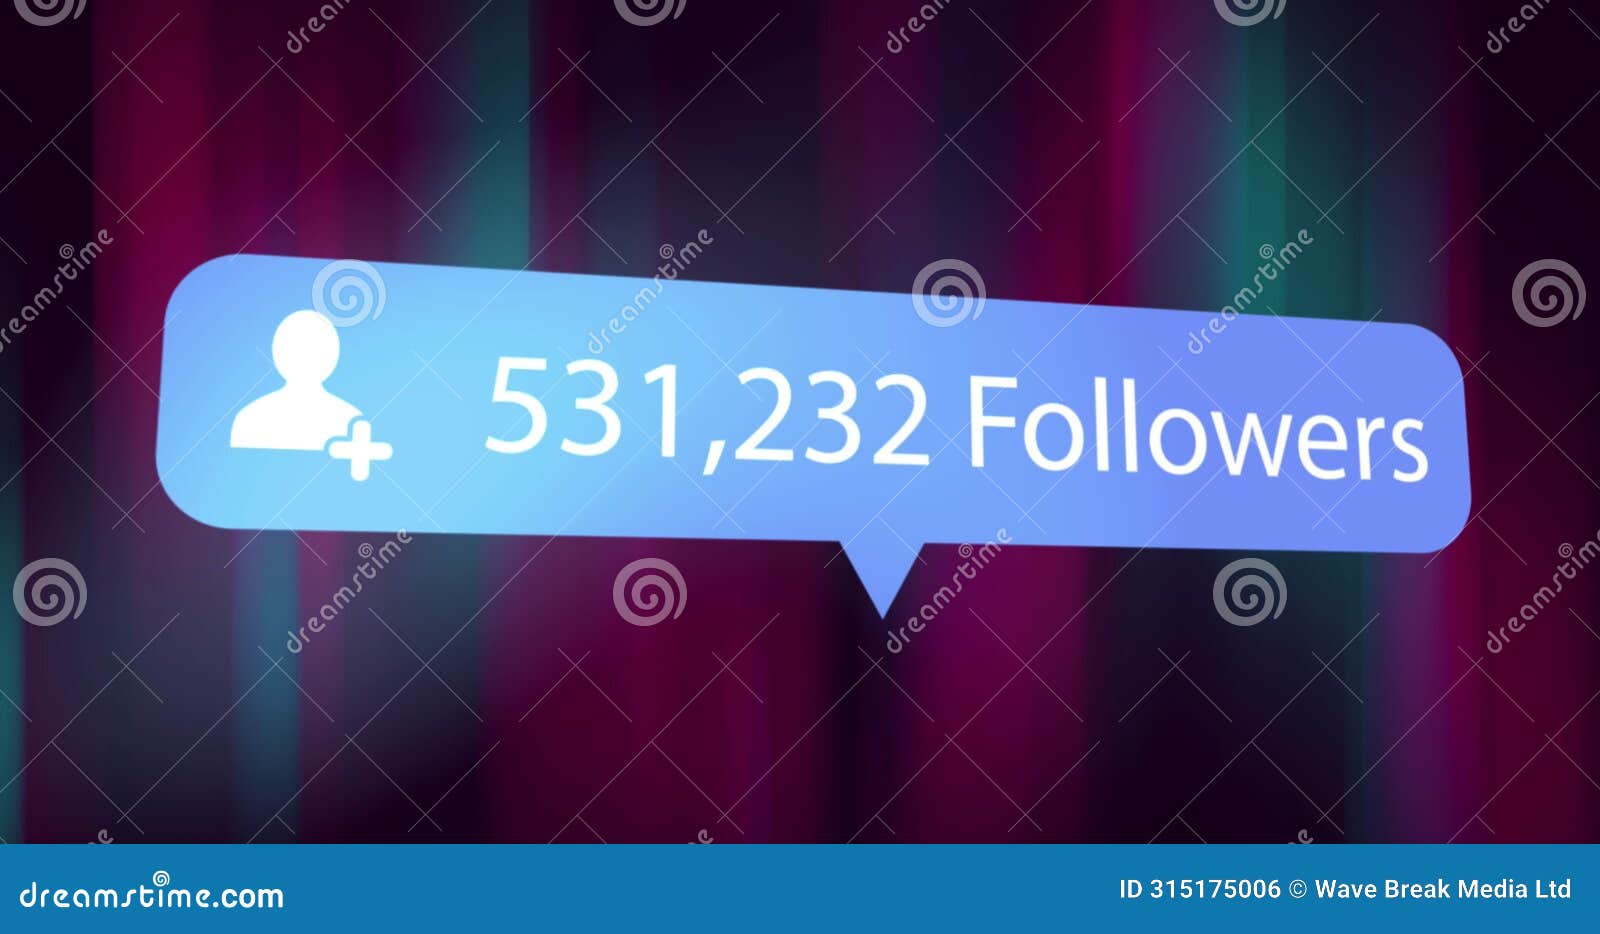 a graphic showing social media notification of gaining 531,232 followers